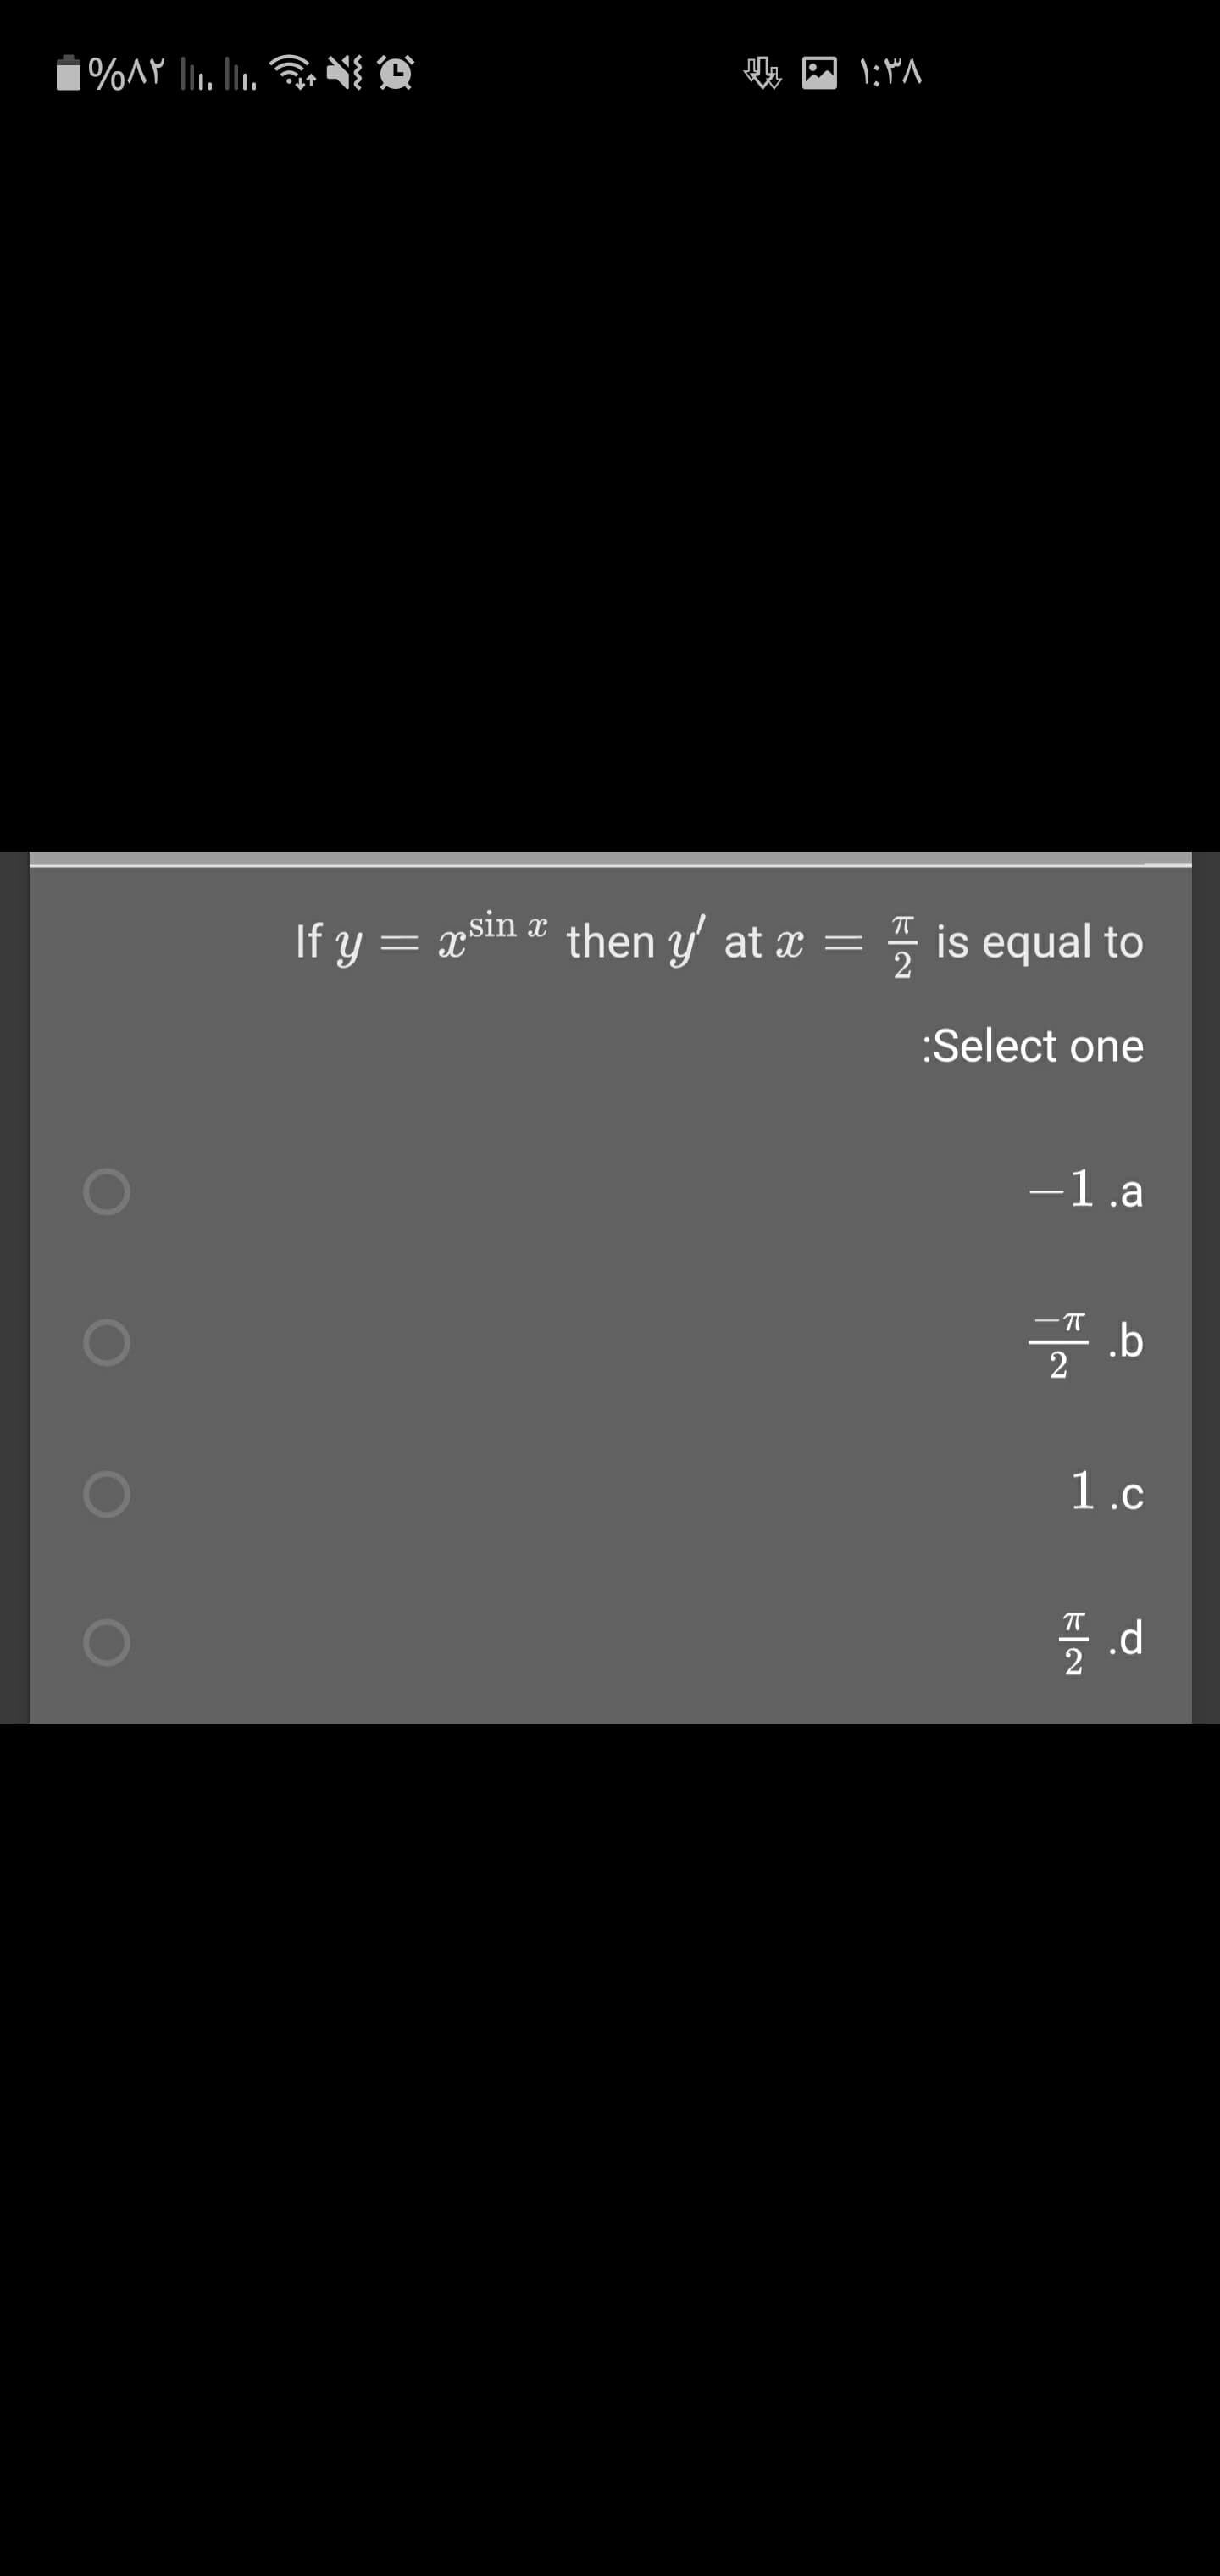 If y = xsin then y
is equal to
= X"
at x =
